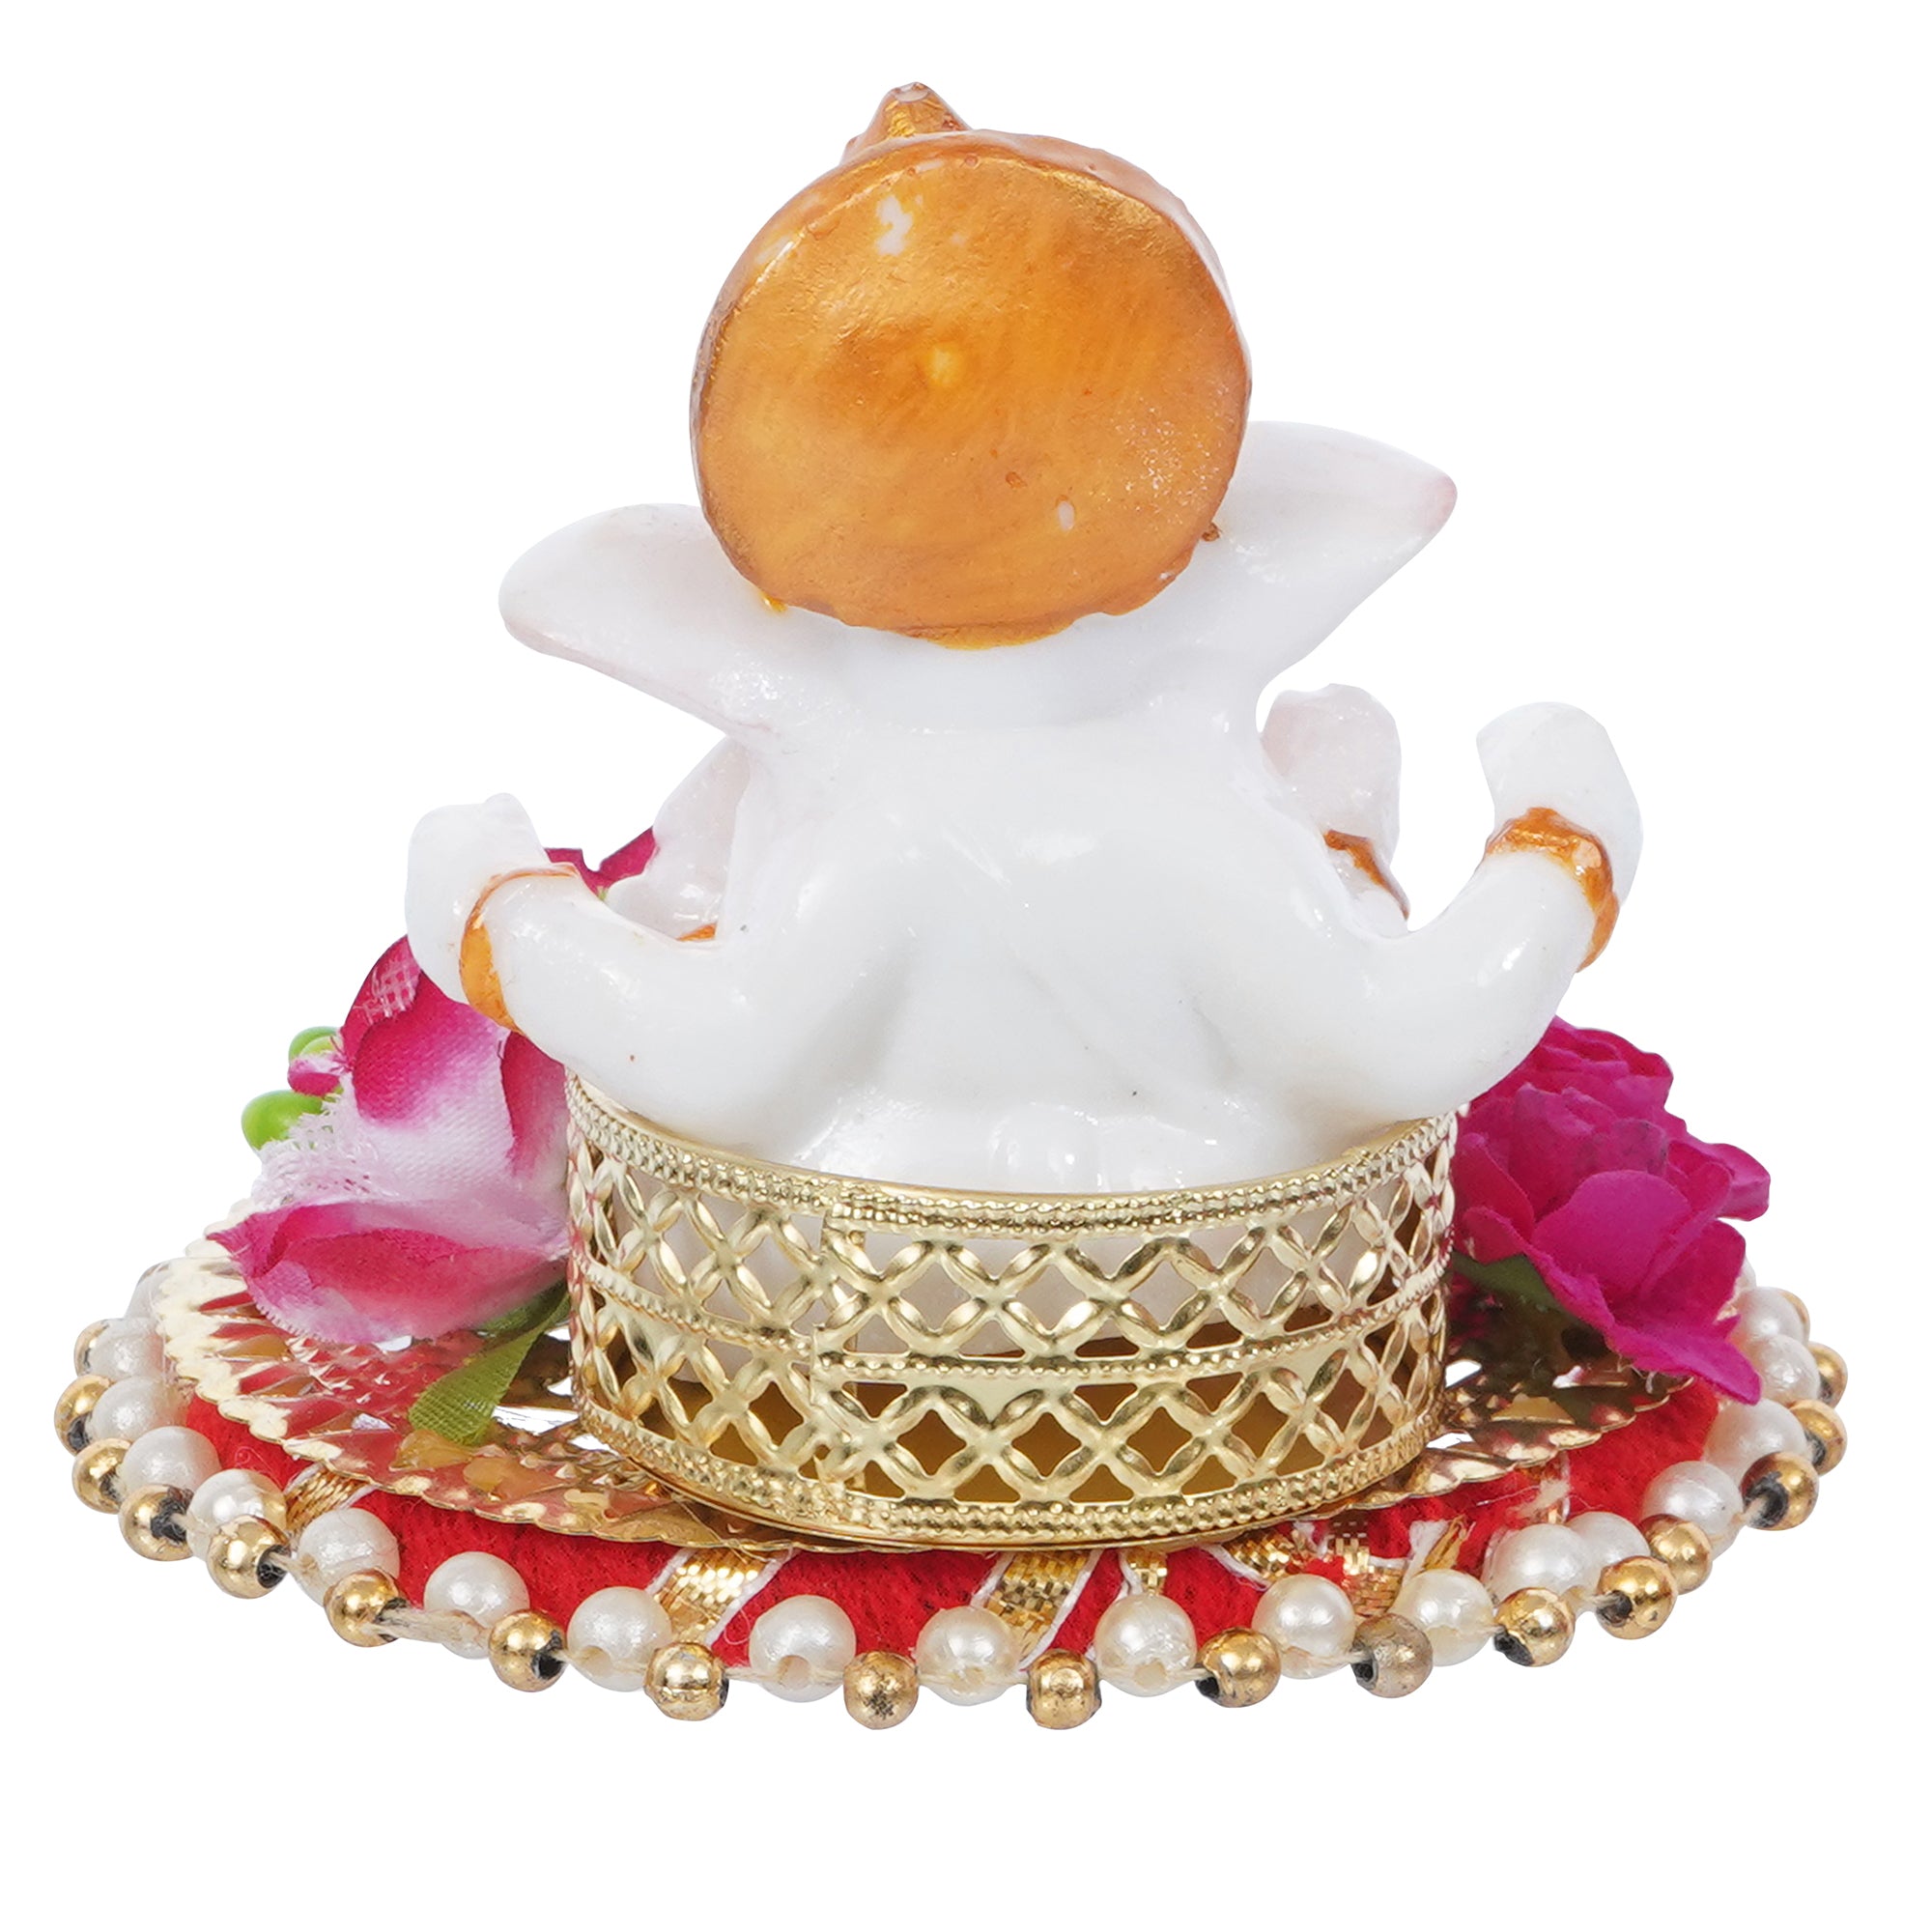 Lord Ganesha Idol On Decorative Handcrafted Colorful Flowers Plate 6